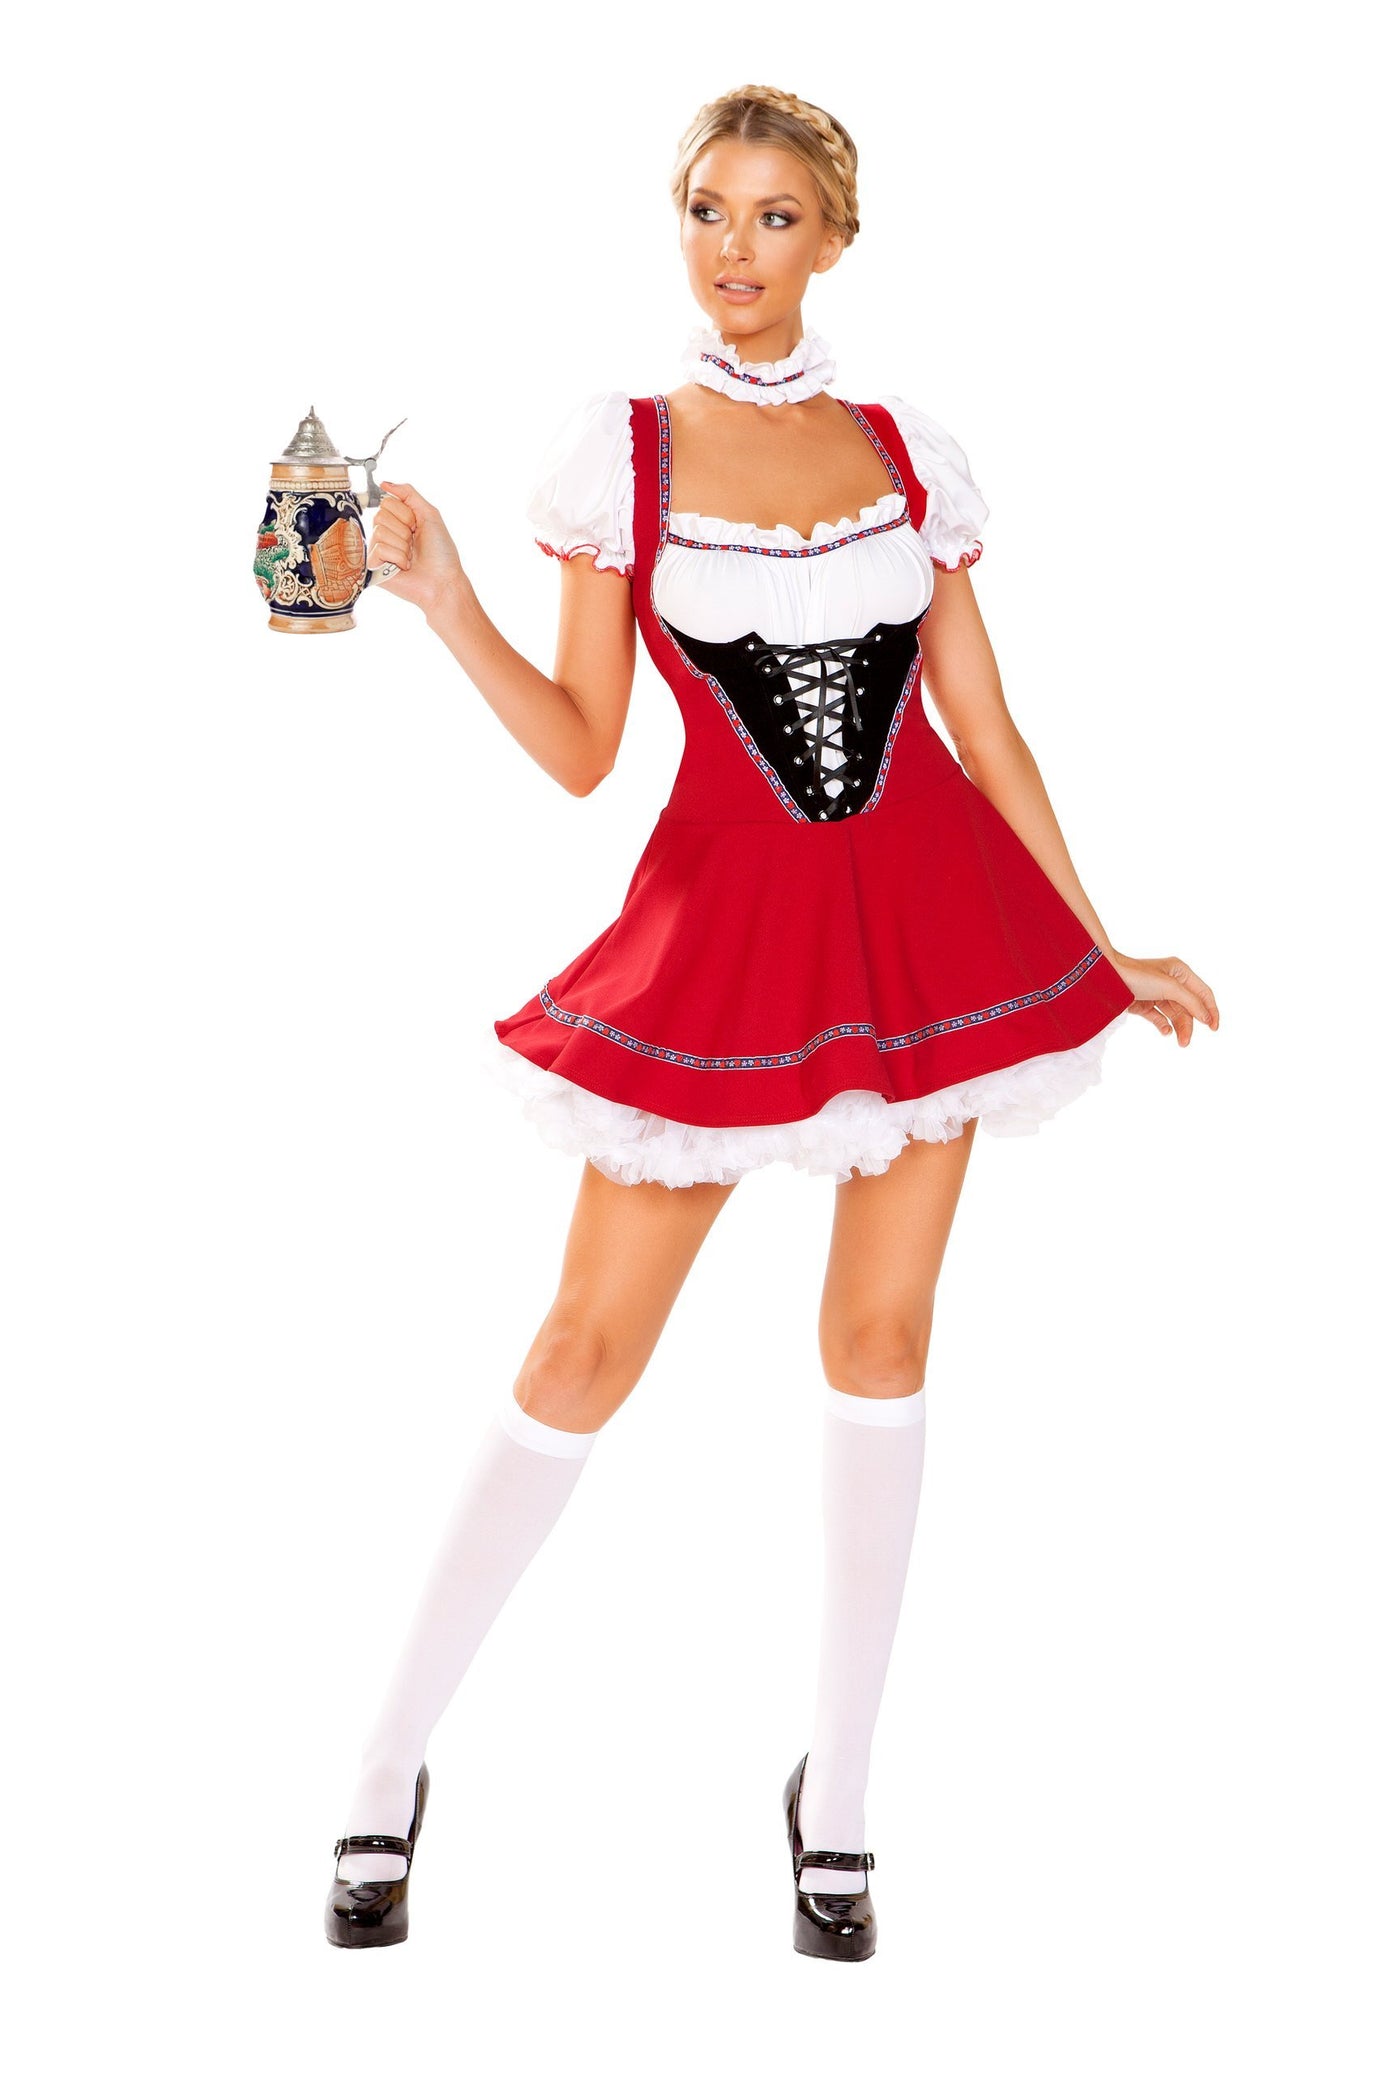 Buy 2pc Beer Wench from RomaRetailShop for 64.99 with Same Day Shipping Designed by Roma Costume 4947-AS-S